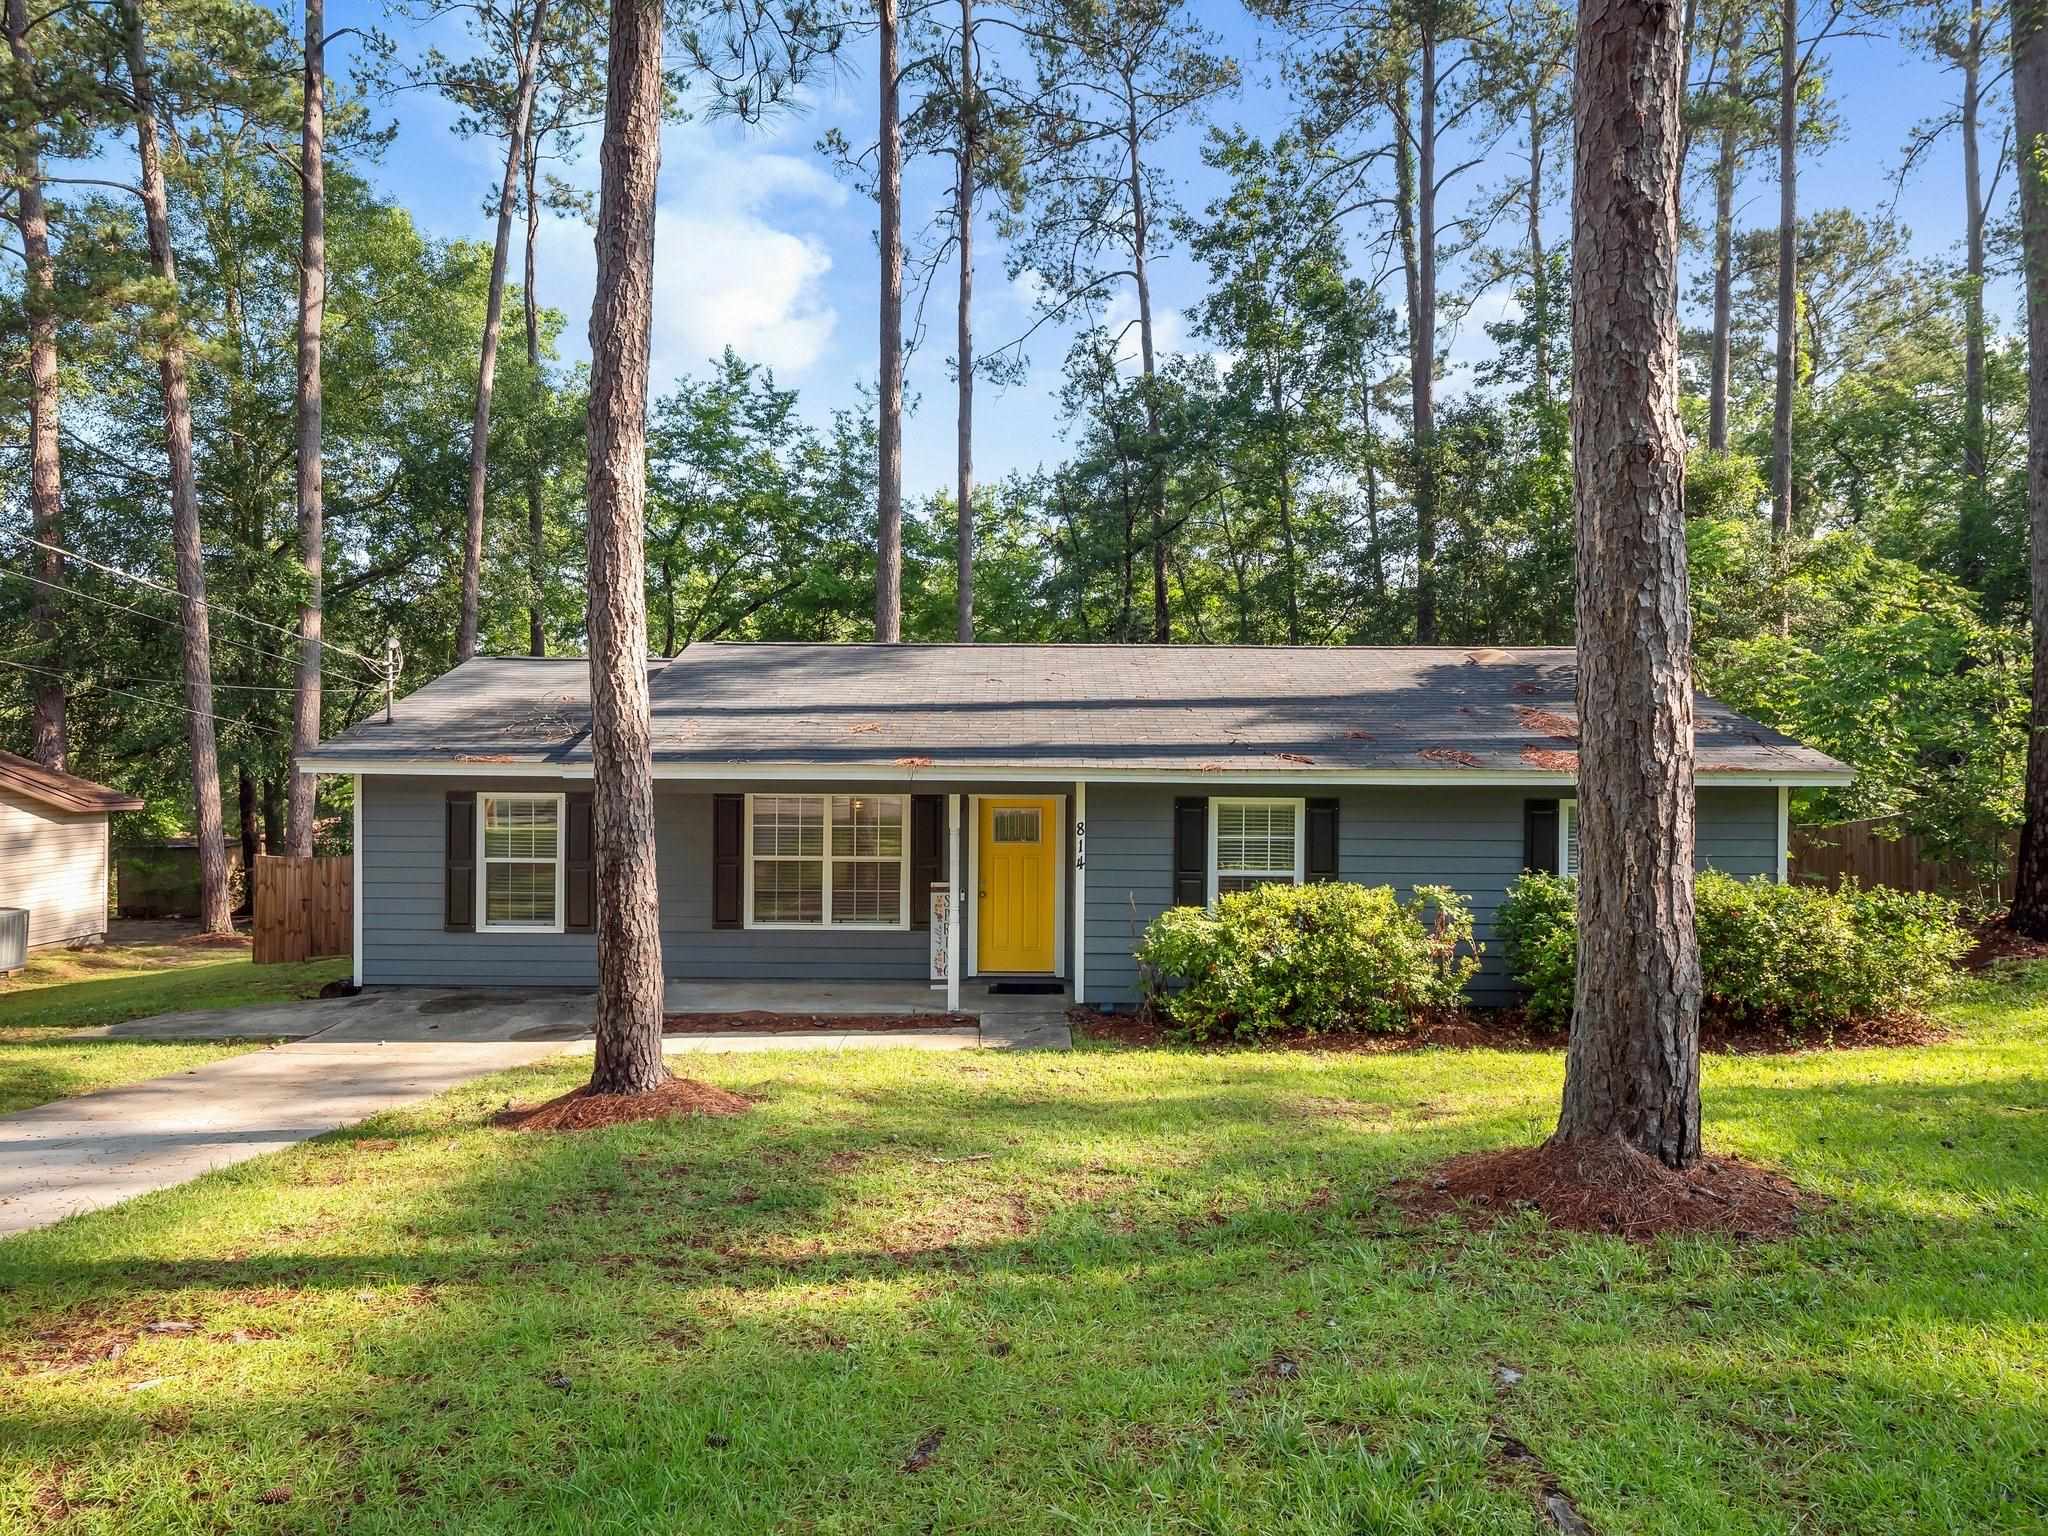 This renovated luxury style home in Apalachee Ridge is turnkey and under 220k! Newer Roof and HVAC (2019) with newer Hot Water Heater (2021). Fully fenced backyard for kids and/or pets, white shaker kitchen cabinets, vinyl plank flooring, tile, recessed lighting. Master bedroom features his/hers walk-in closets. This one is a must see and won’t last long.